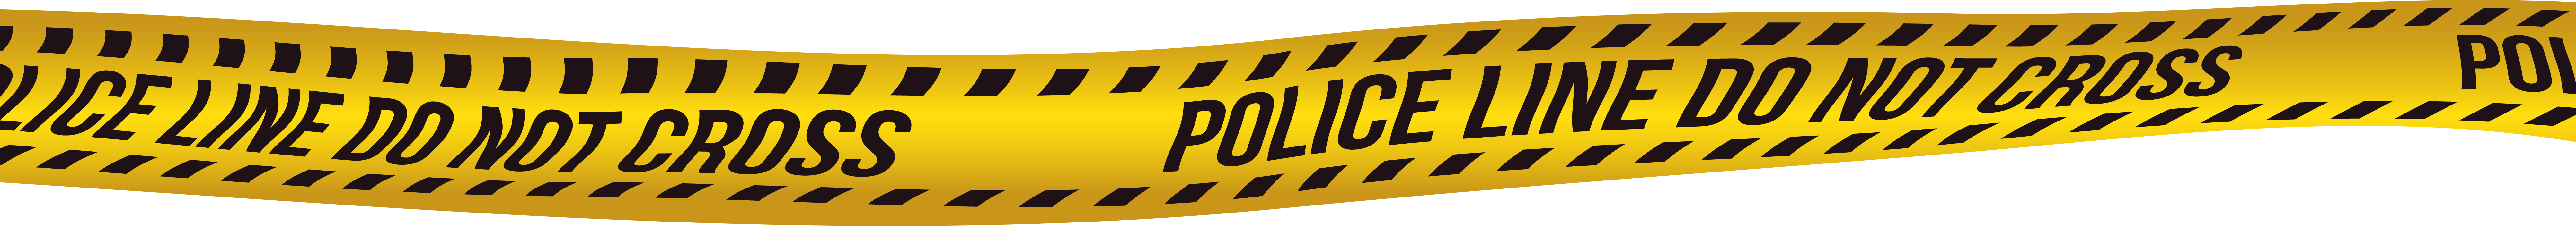 Do Not Cross Police Line PNG Clip Art Image.